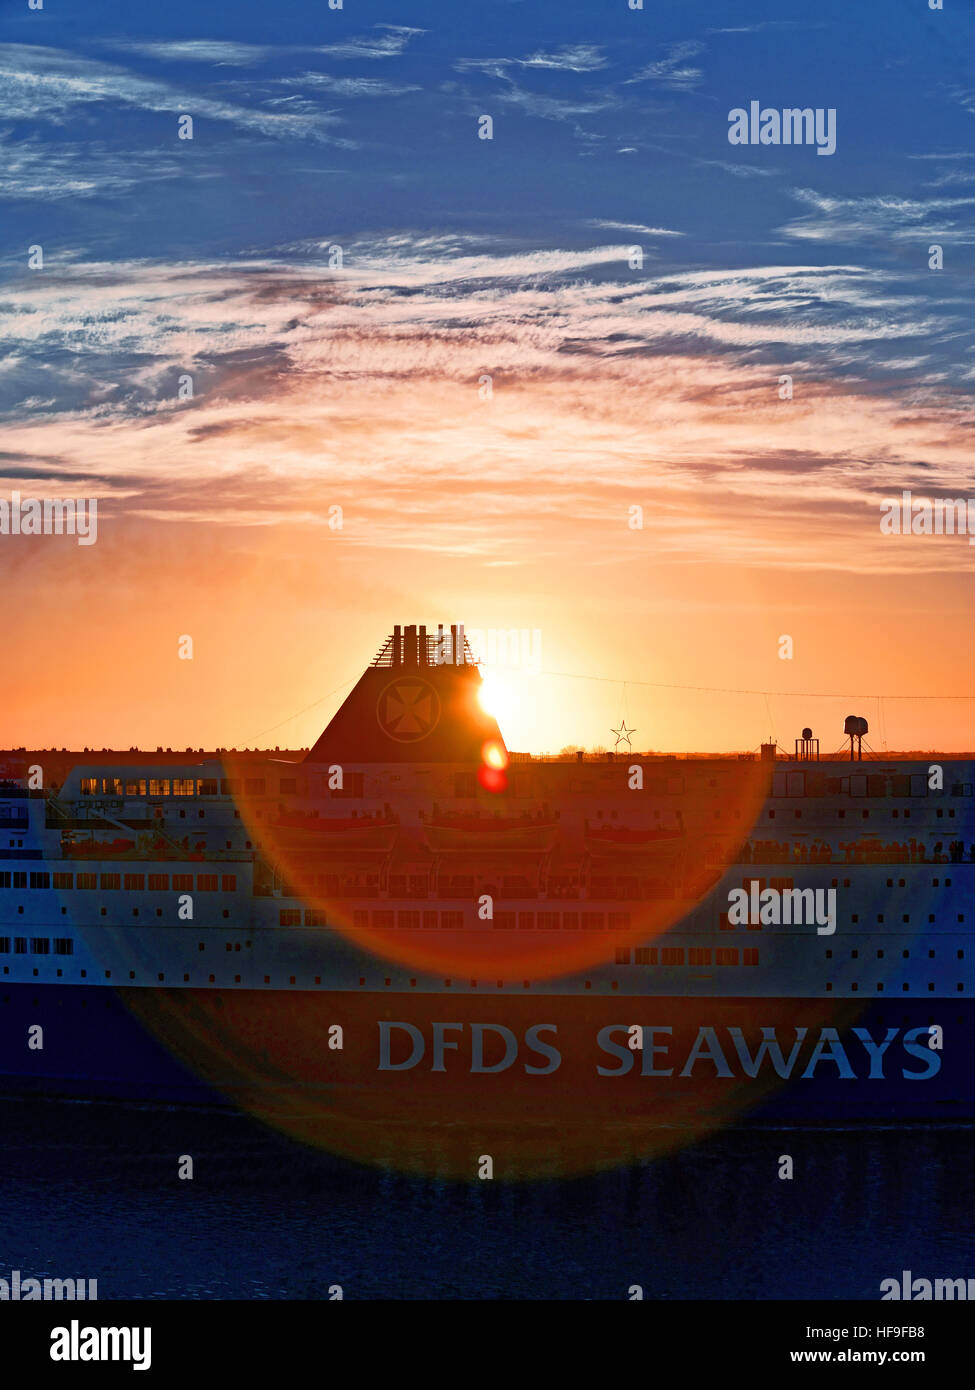 DFDS Seaways Newcastle ferry at dawn Stock Photo